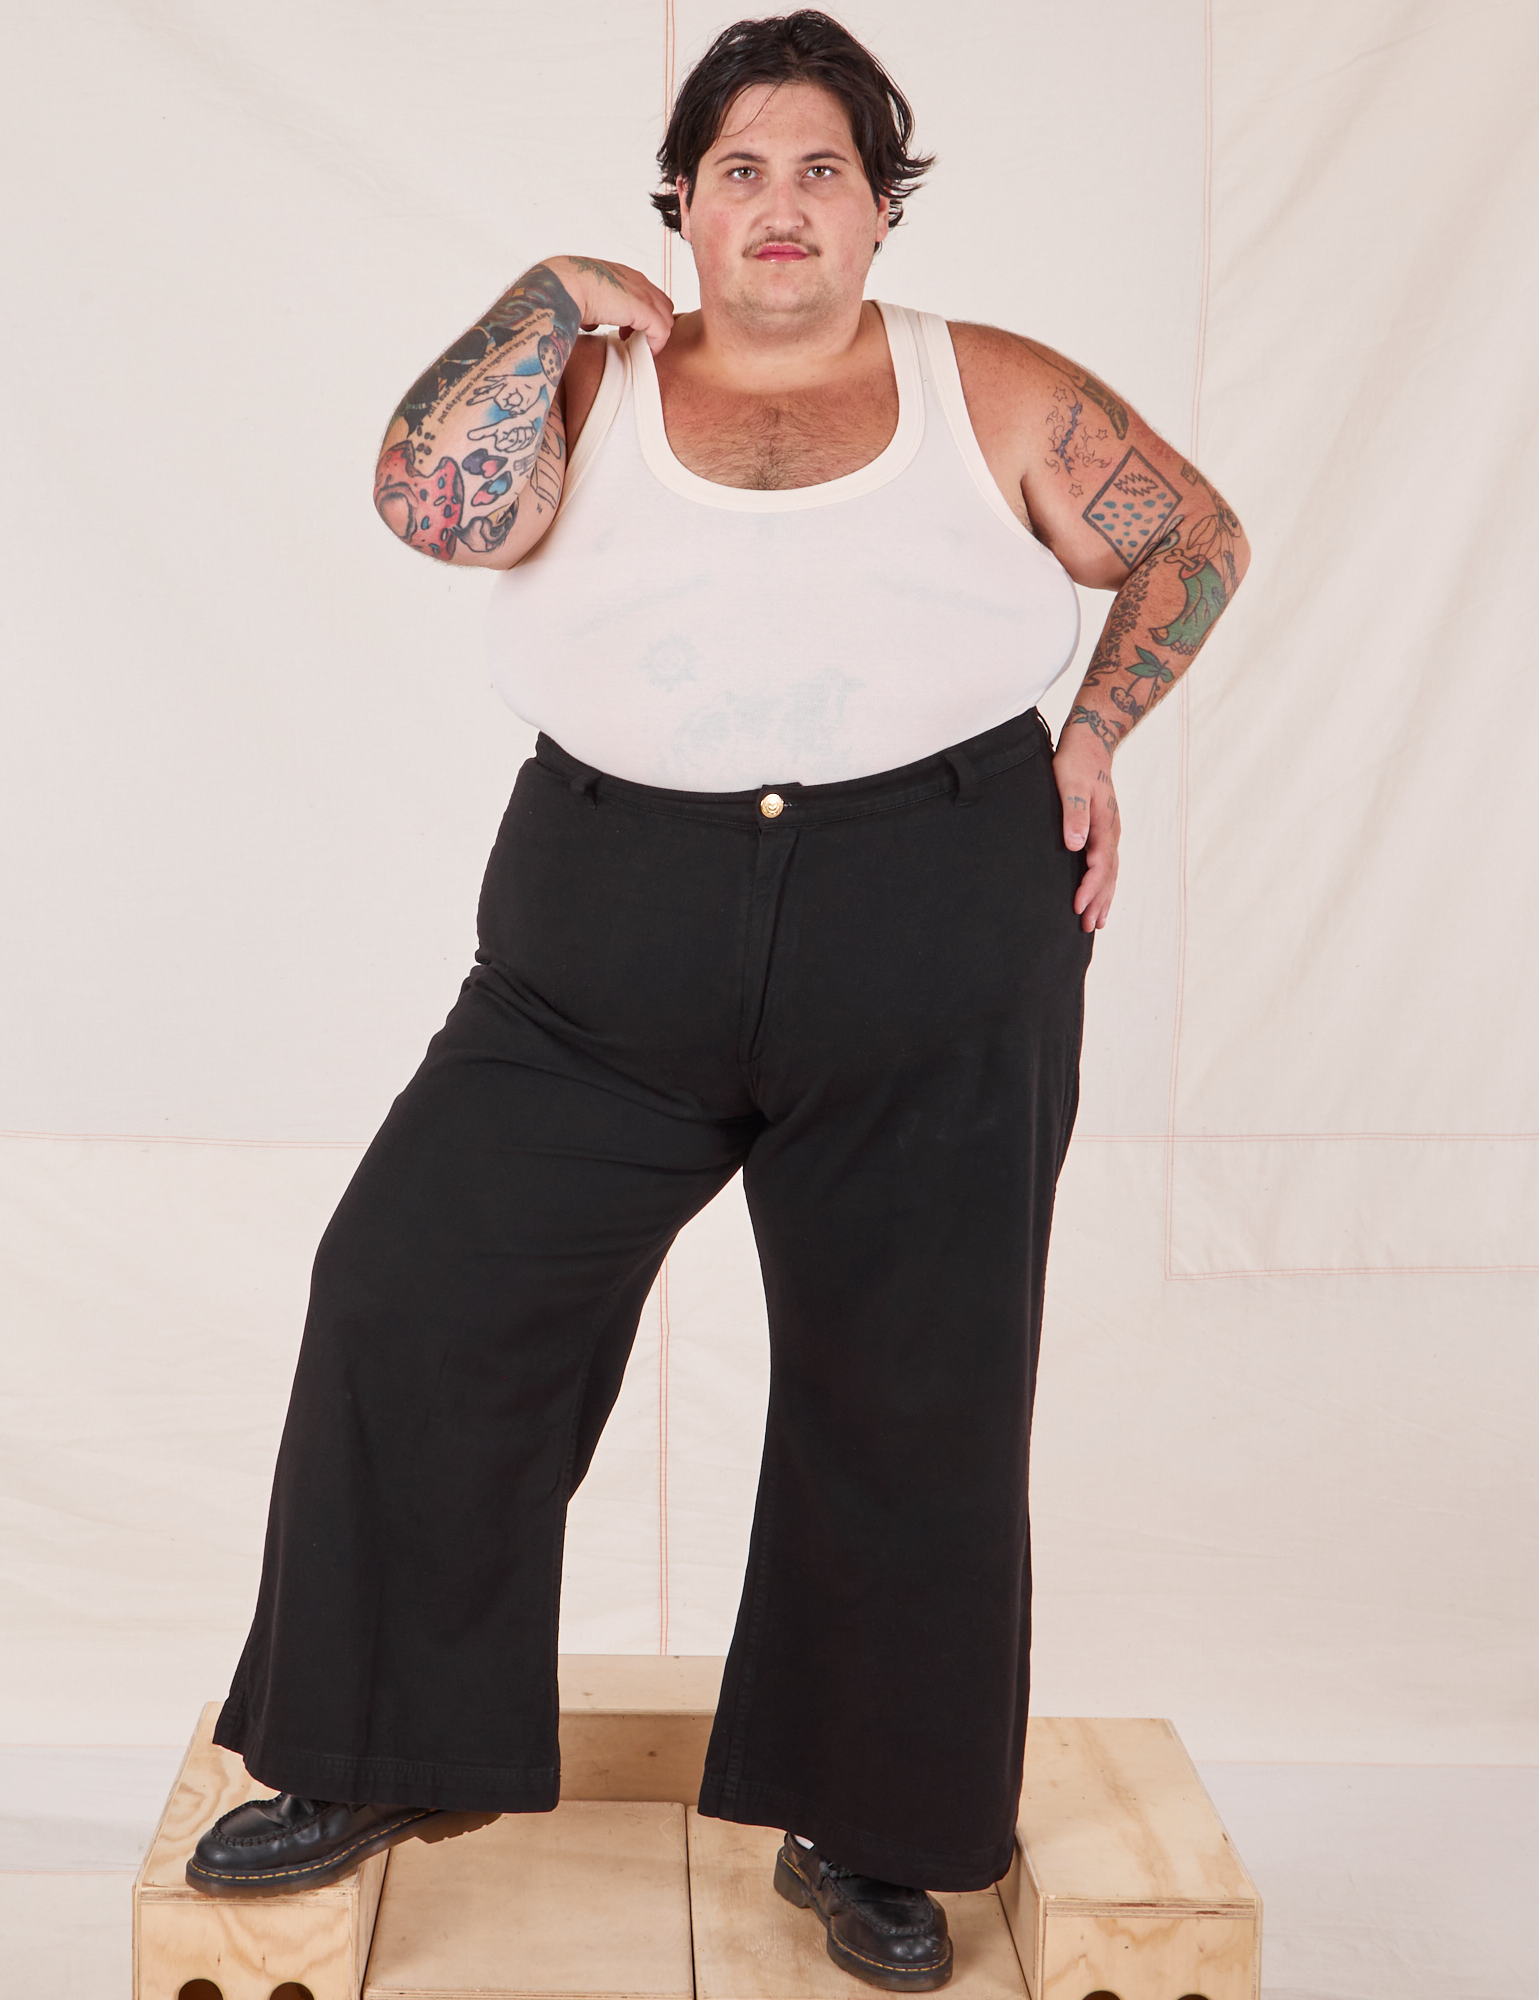 Sam is 5&#39;10&quot; and wearing 3XL Bell Bottoms in Basic Black paired with vintage off-white Cropped Tank Top